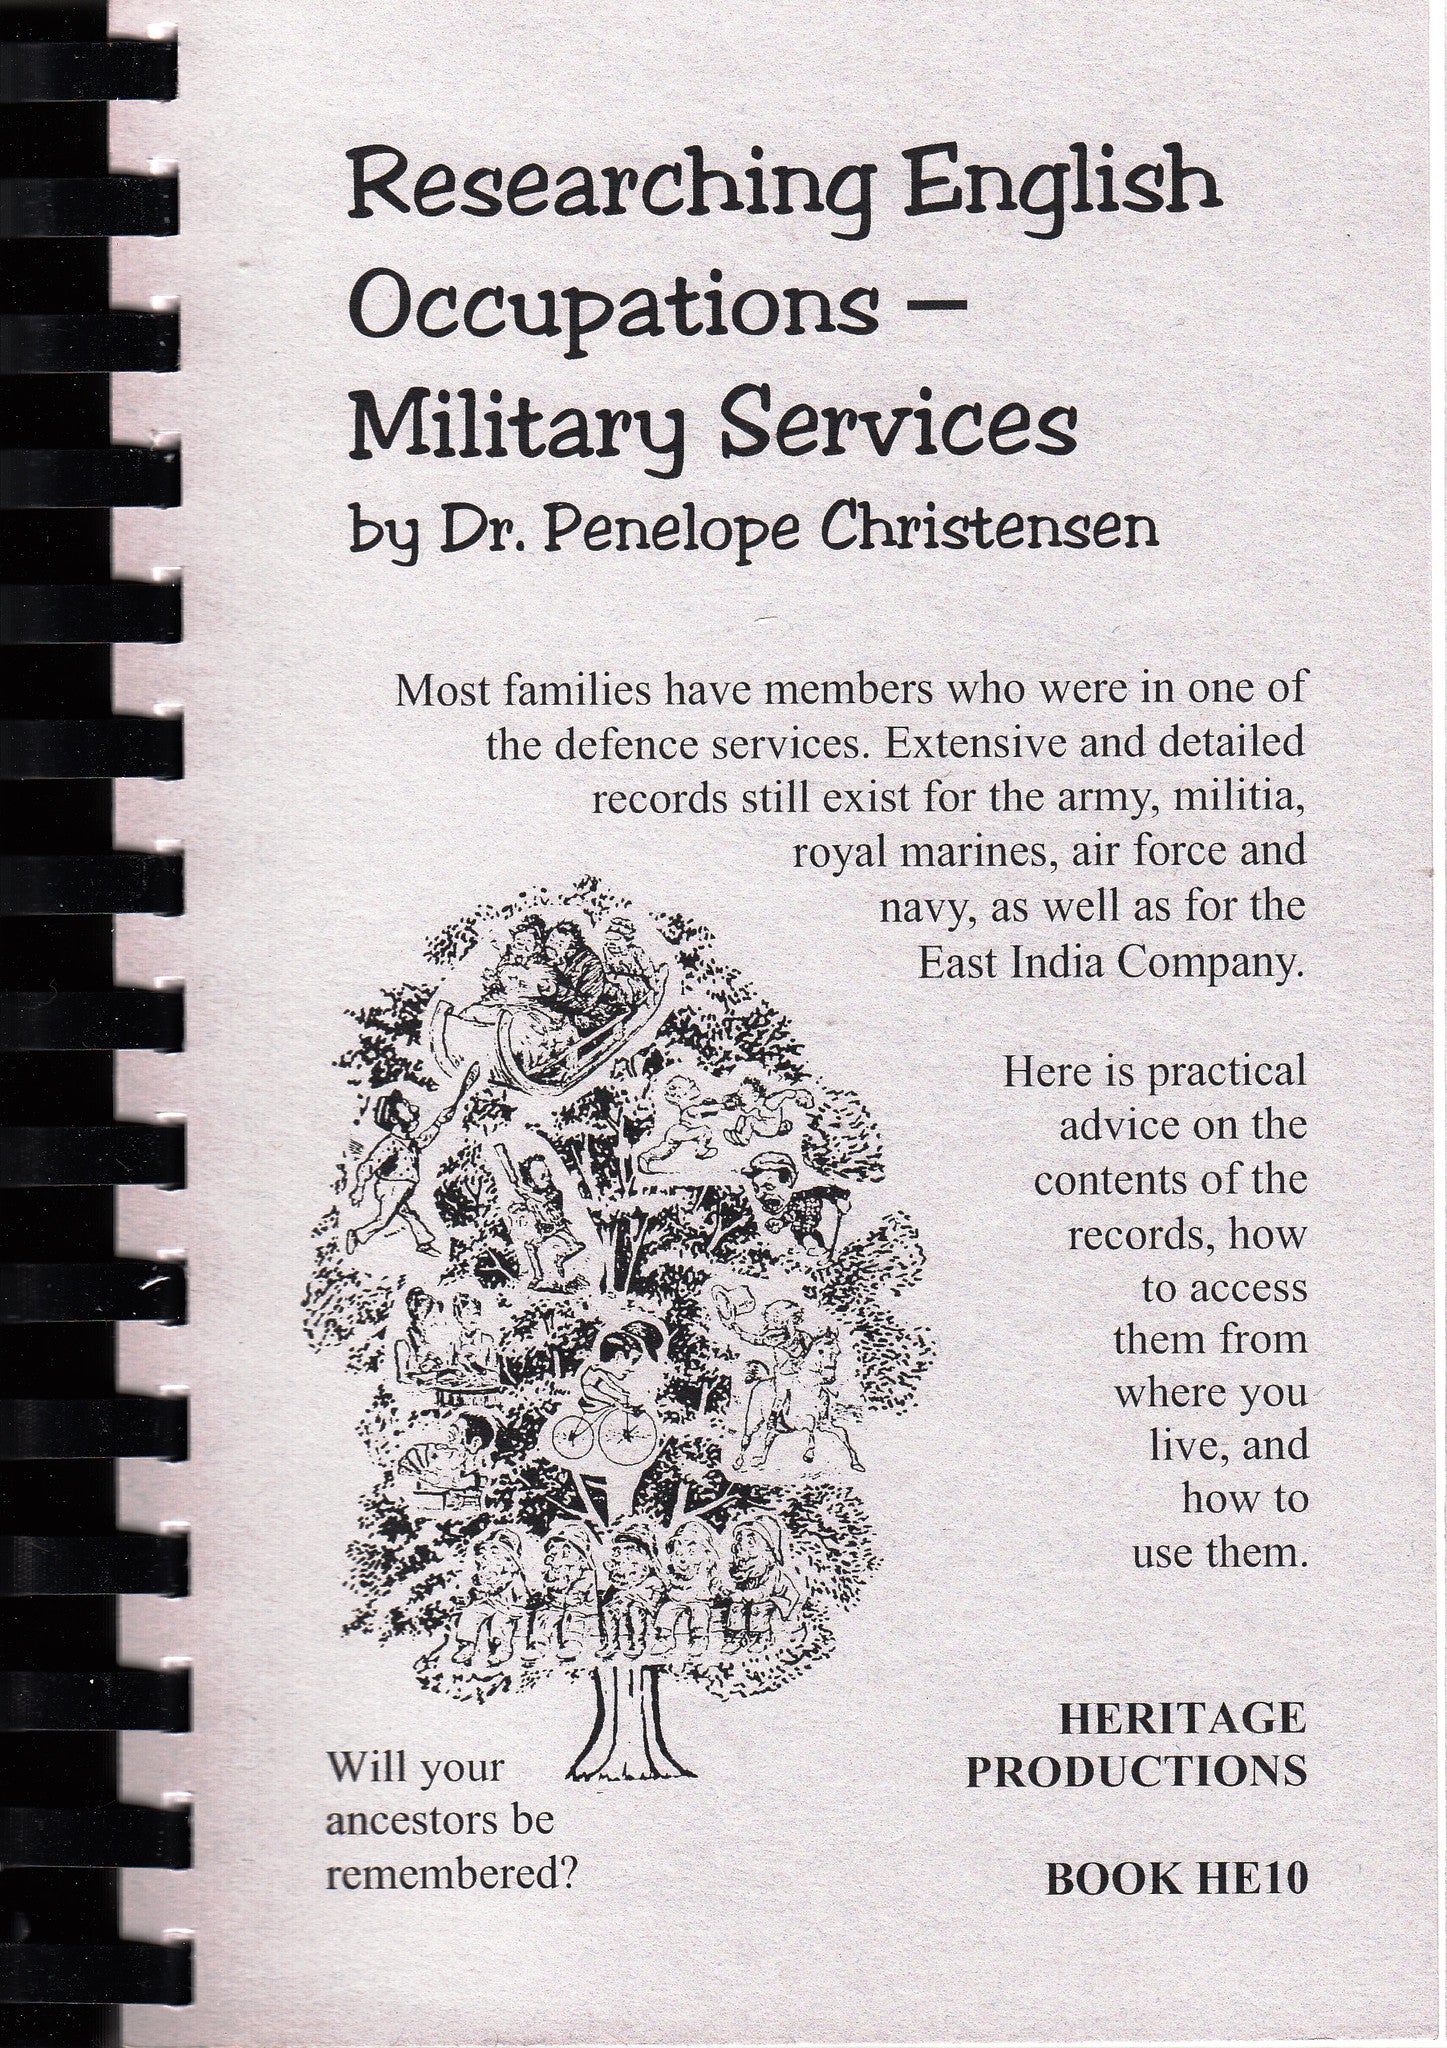 Researching English Occupations-Military Services